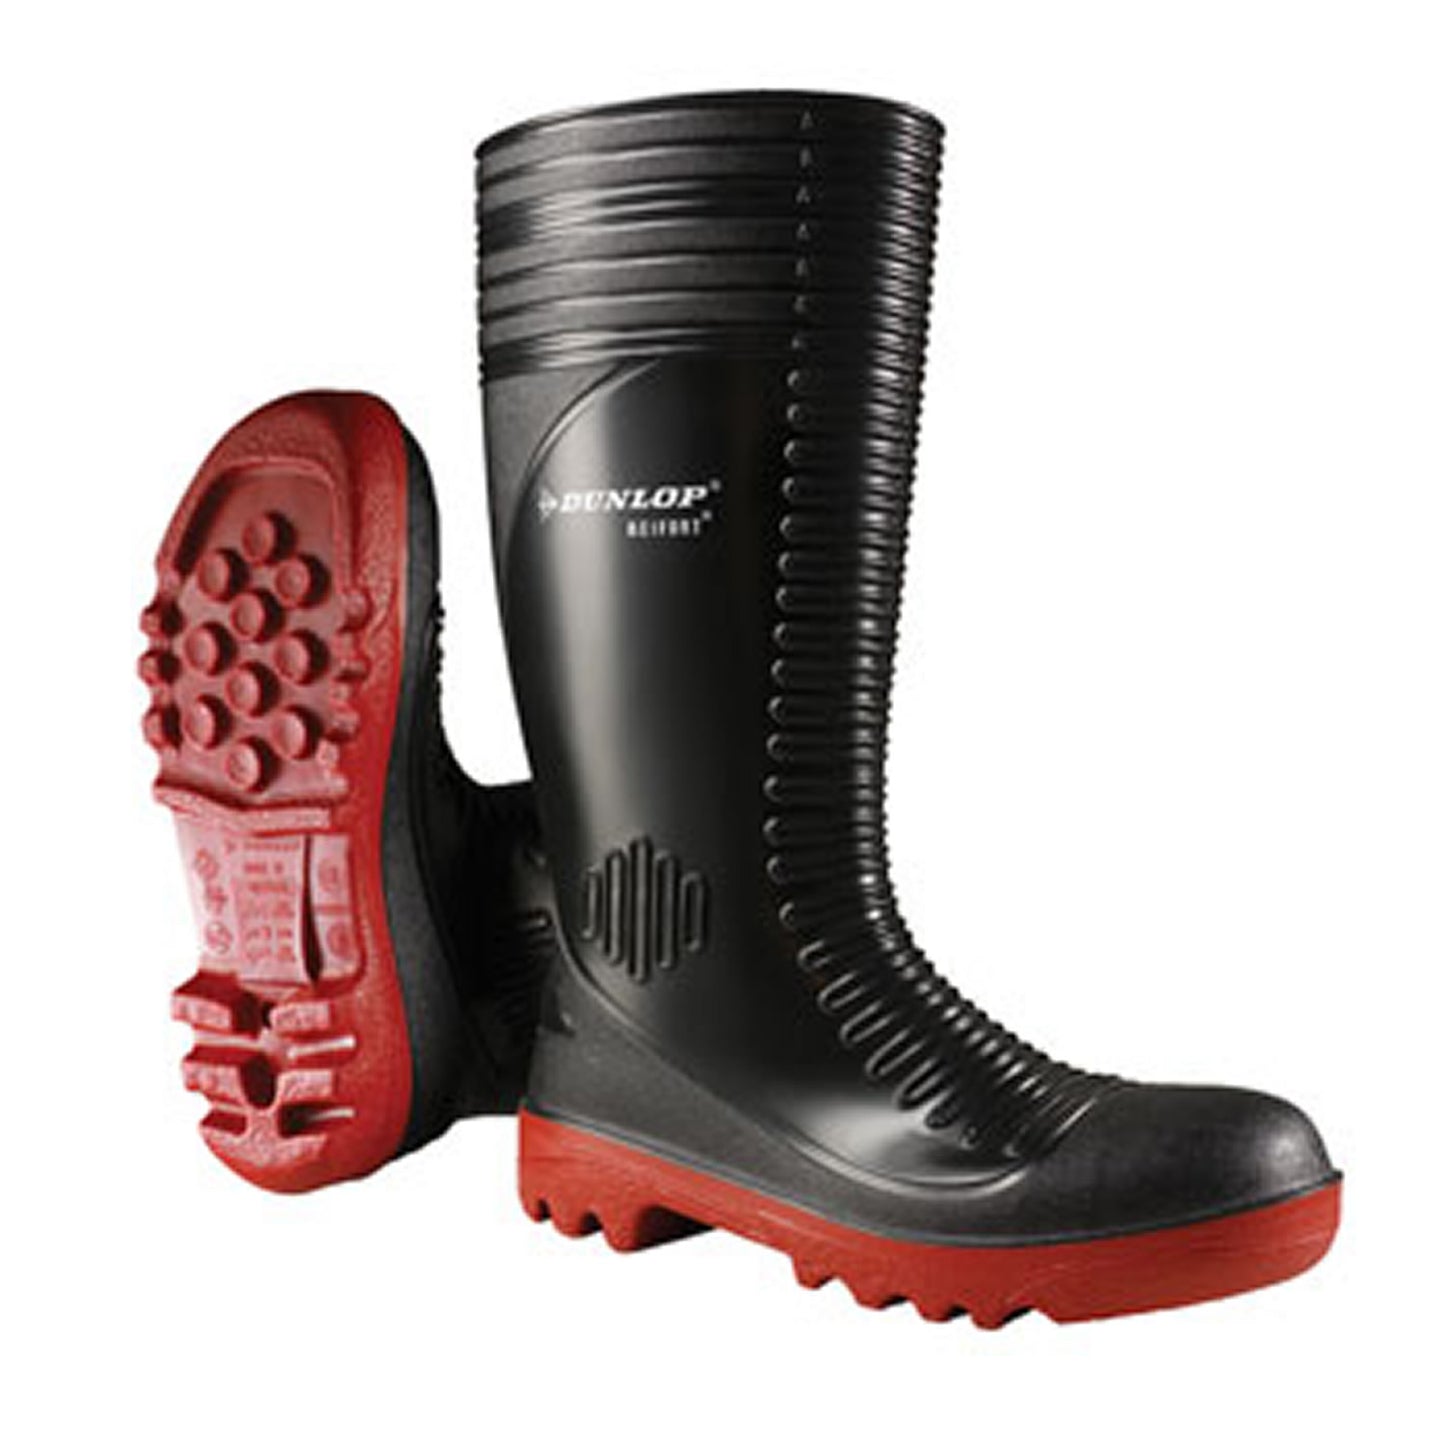 Dunlop Acifort Ribbed Full Safety Wellies